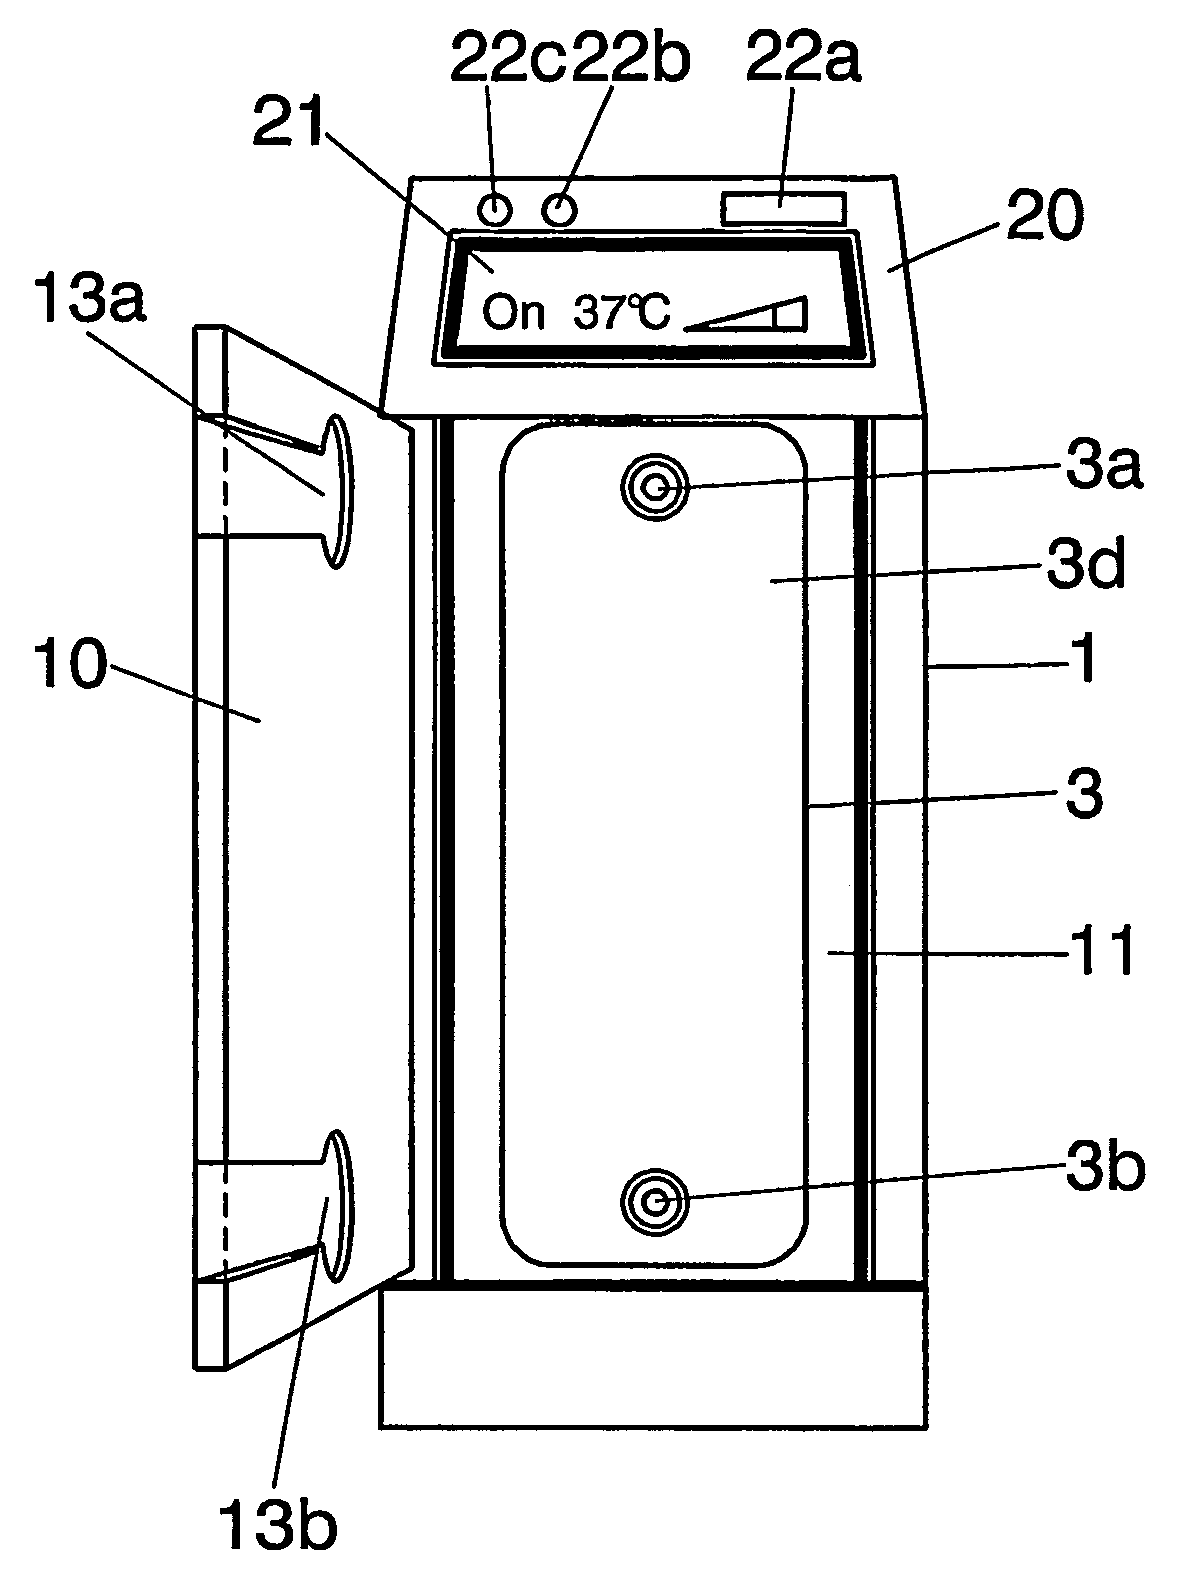 Device for adjusting the temperature of a physiological fluid